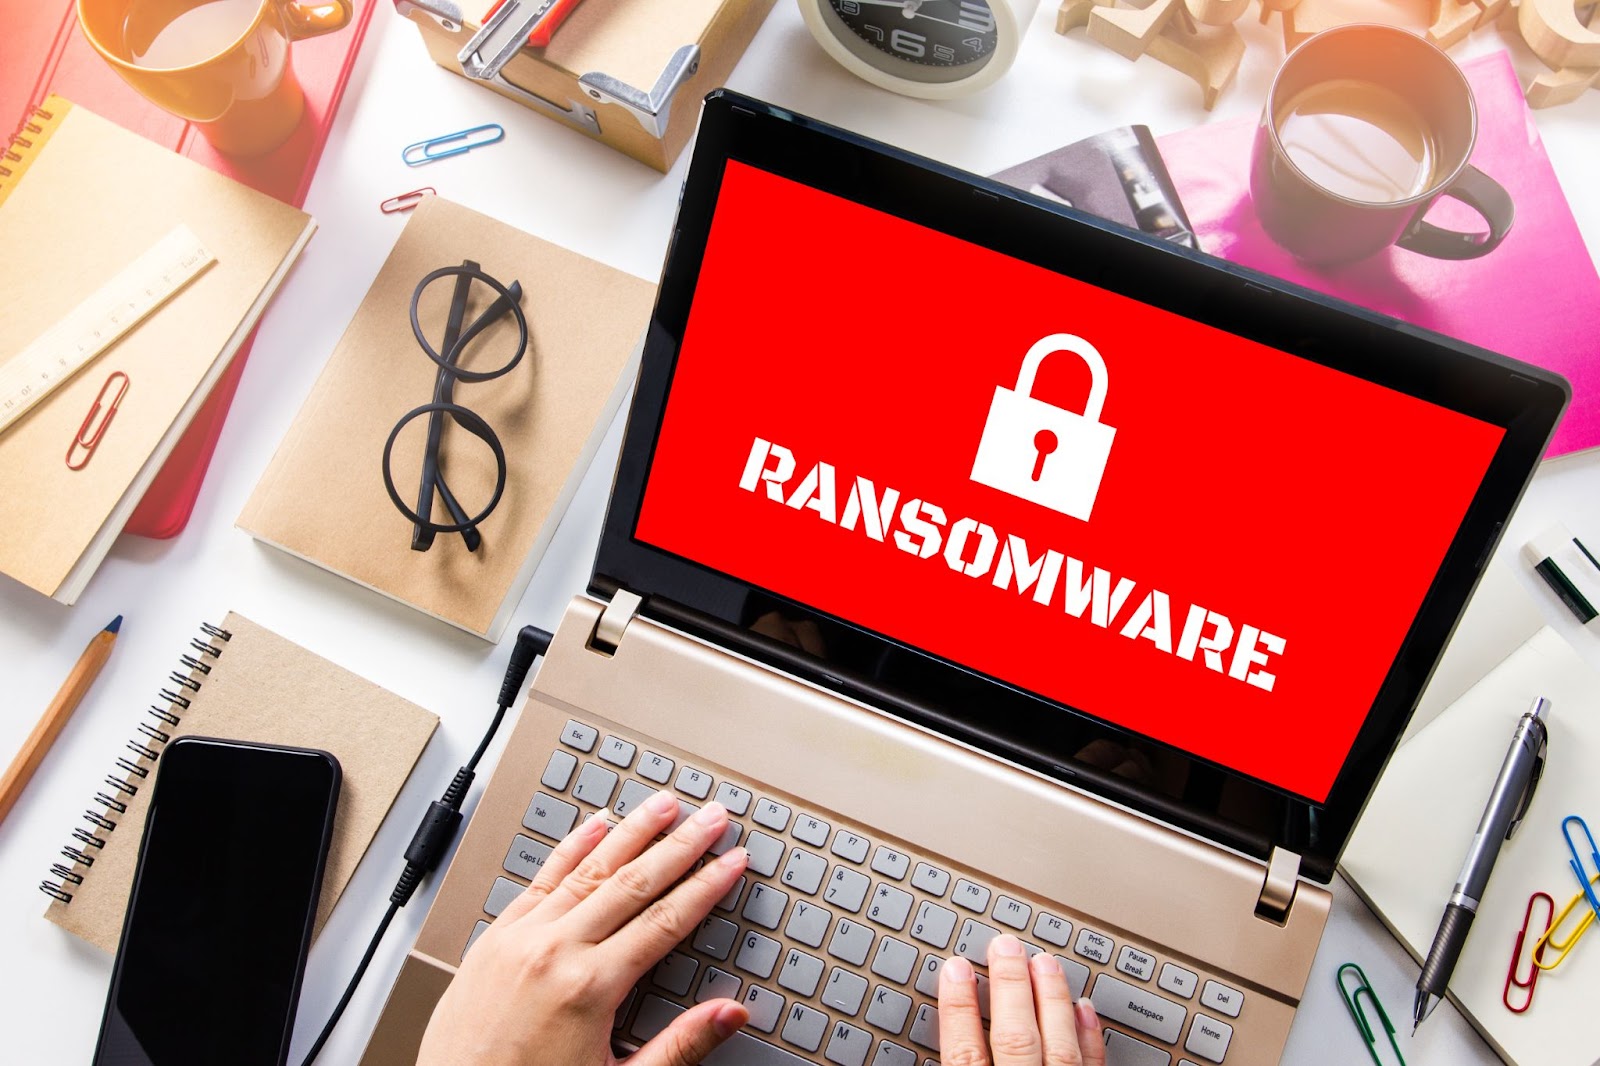 Warning for Ransomware on a laptop screen.